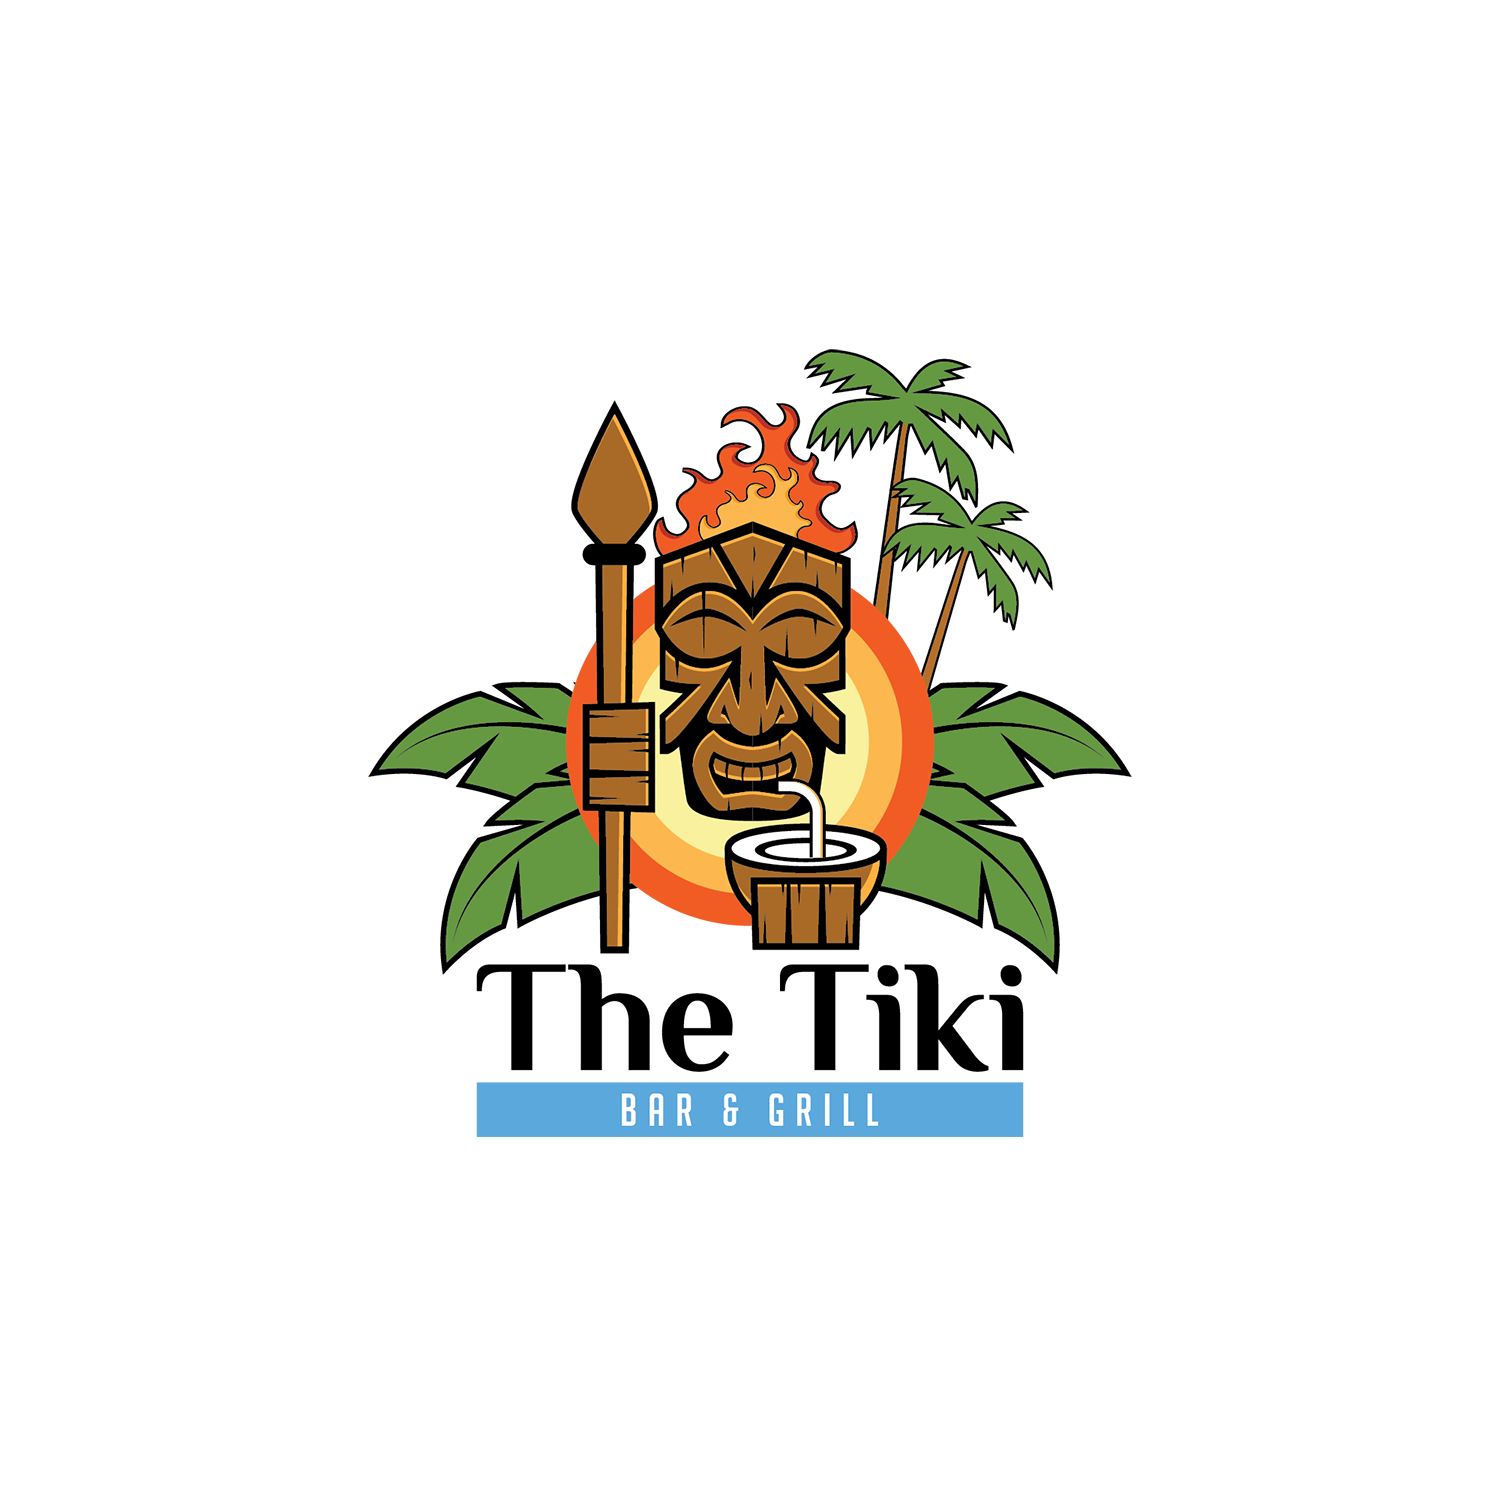 cup clipart tiki